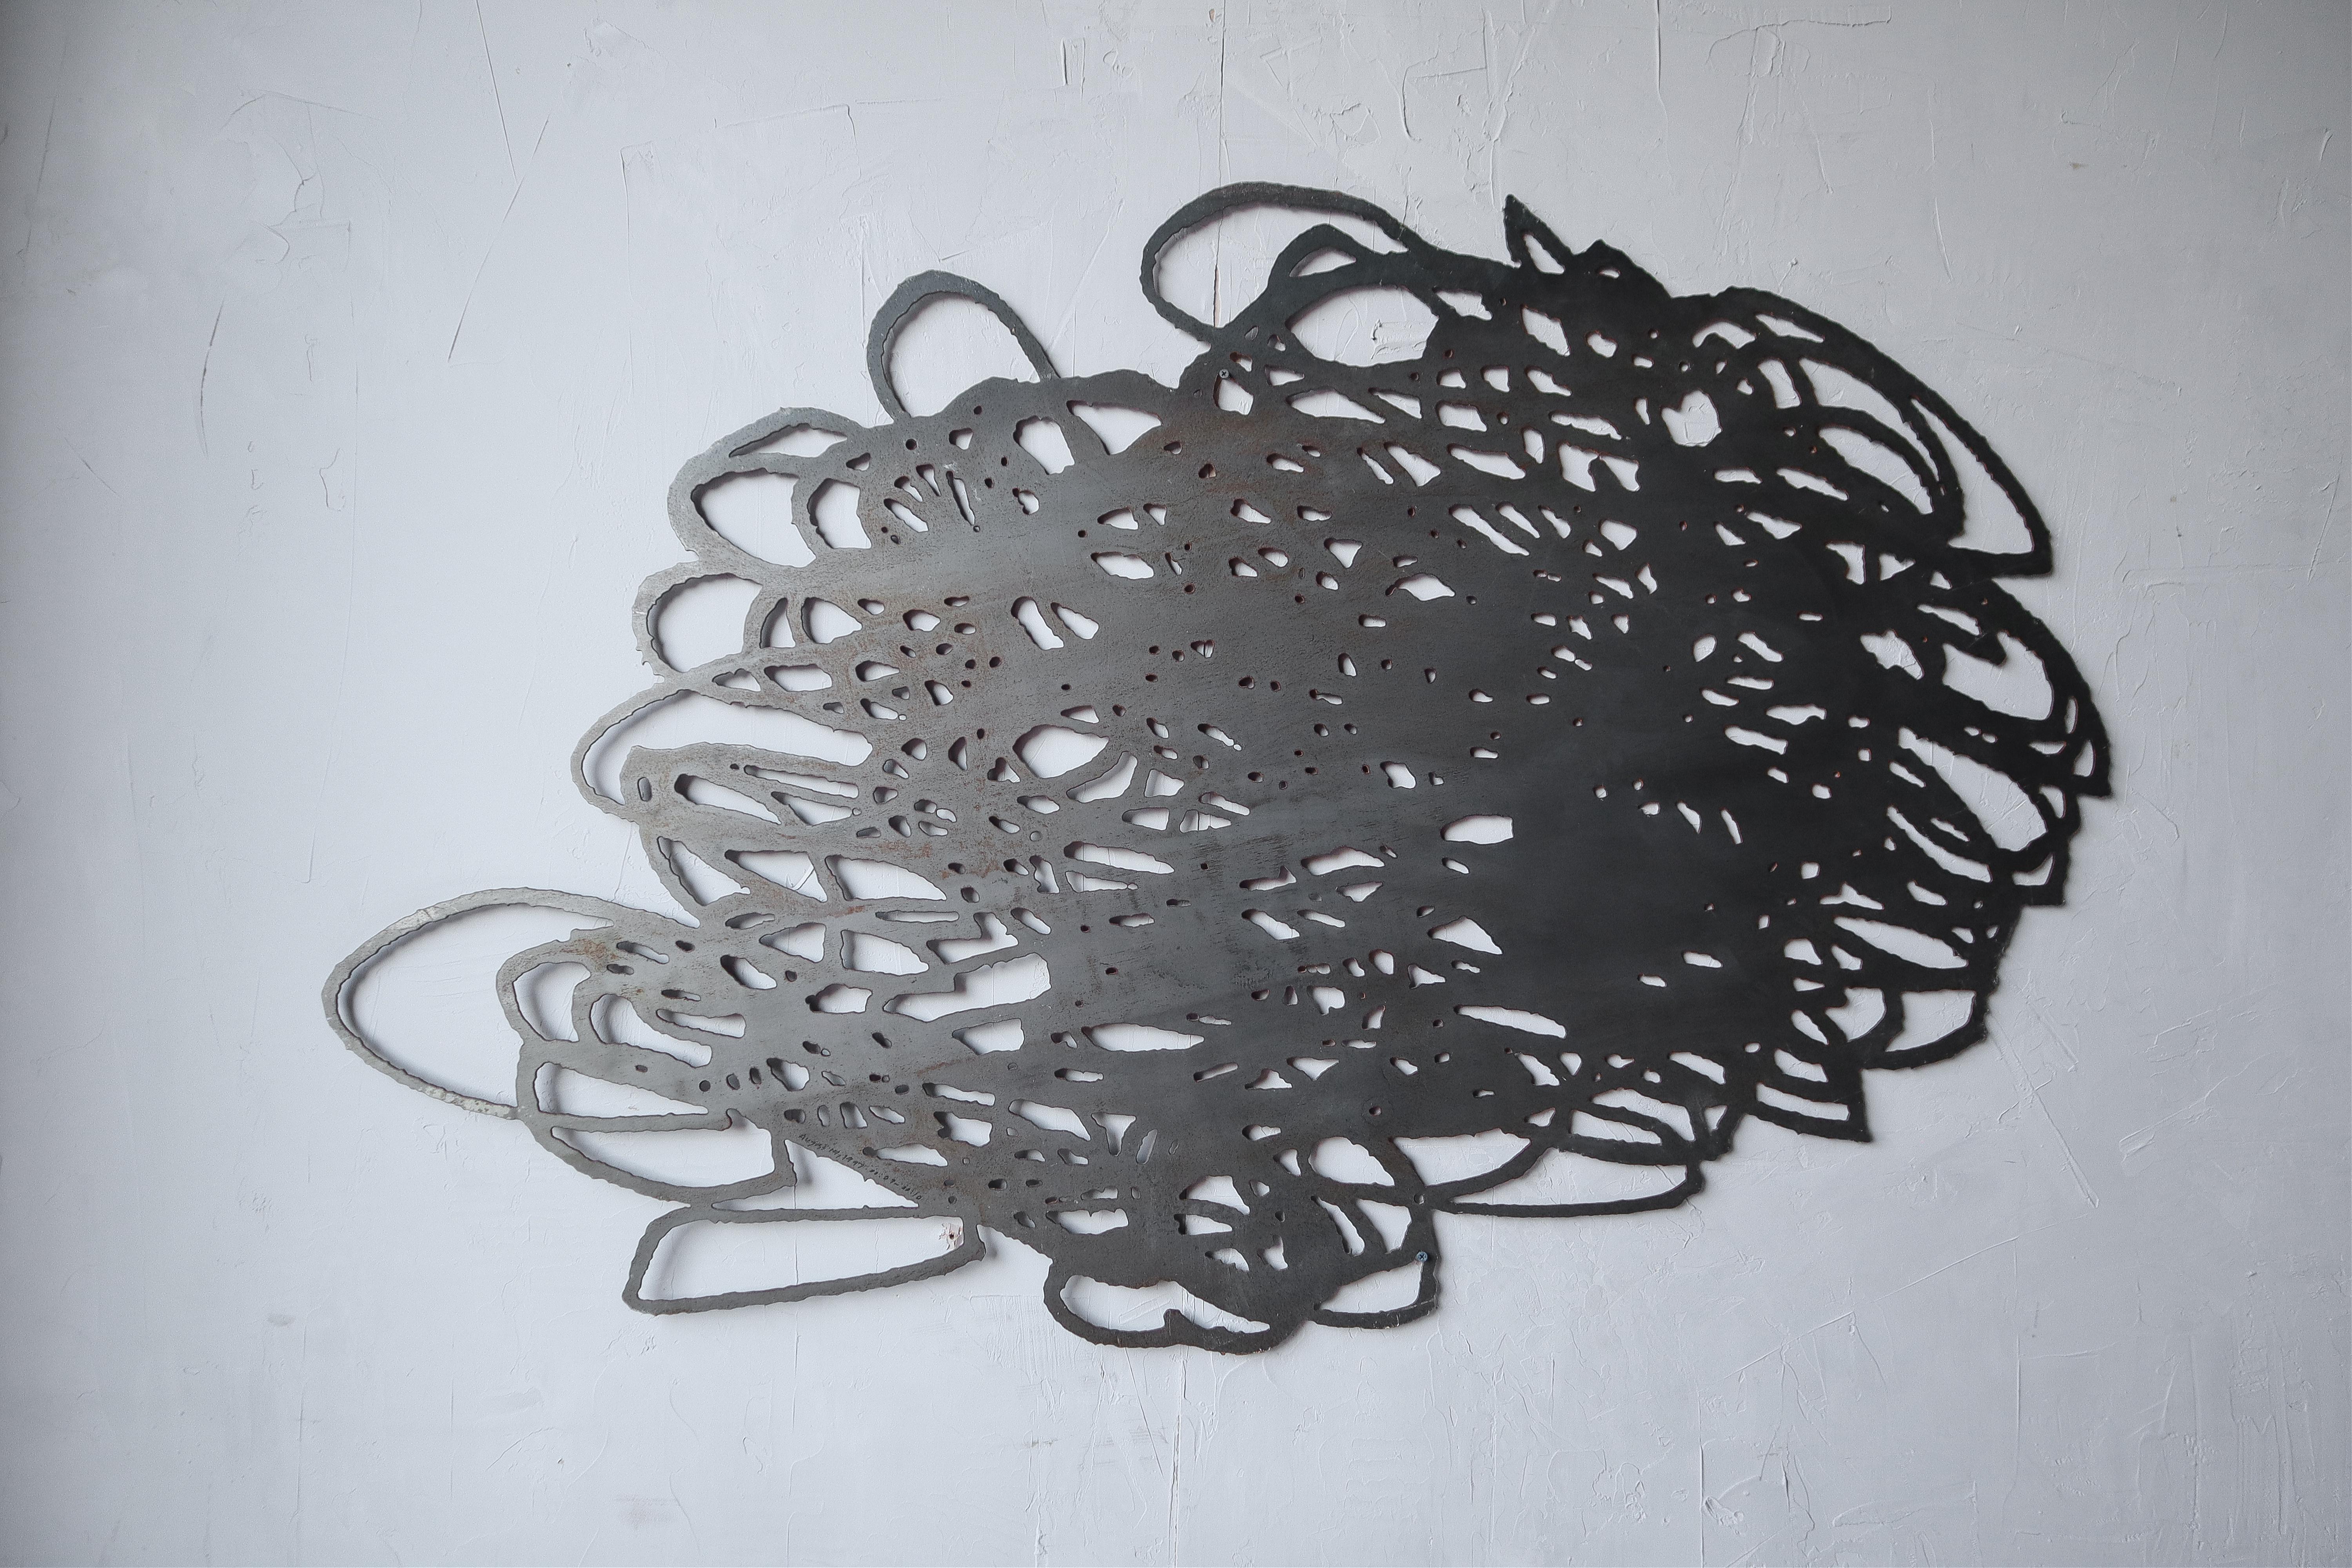 One of a kind, cut steel wall sculpture. Dated August 19, 1997. A super fun piece that would look great in almost any space. If you're looking for a piece of art, different from the usual painting that will make a huge statement, this piece is